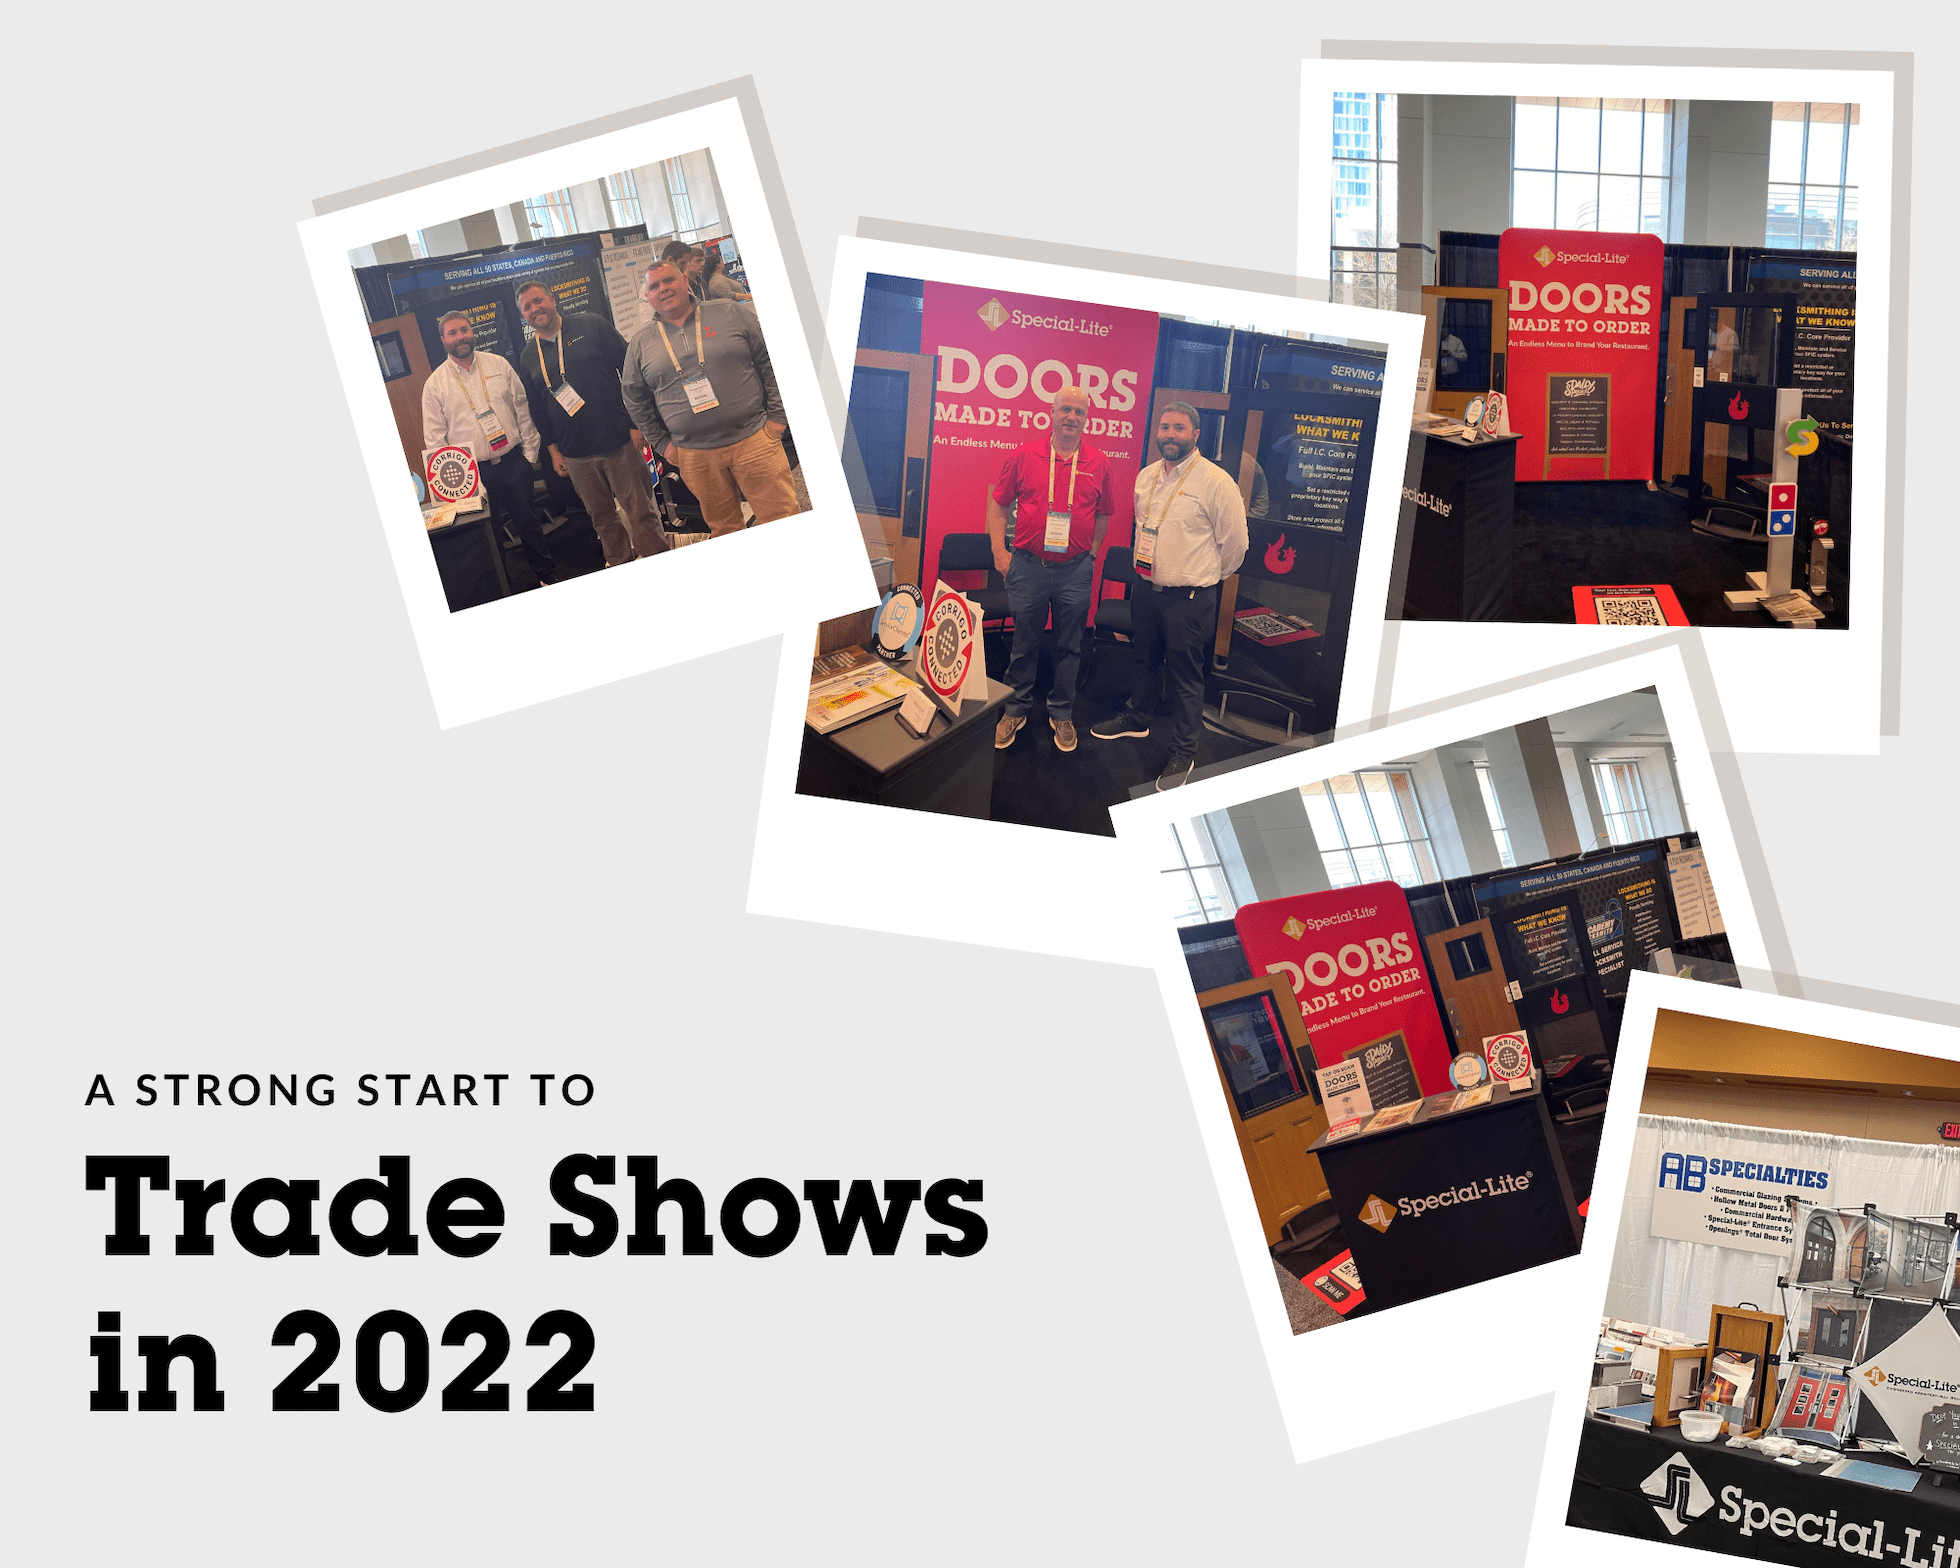 A Start to 2022 Trade Shows with Restaurant “Doors Made to Order” and more!